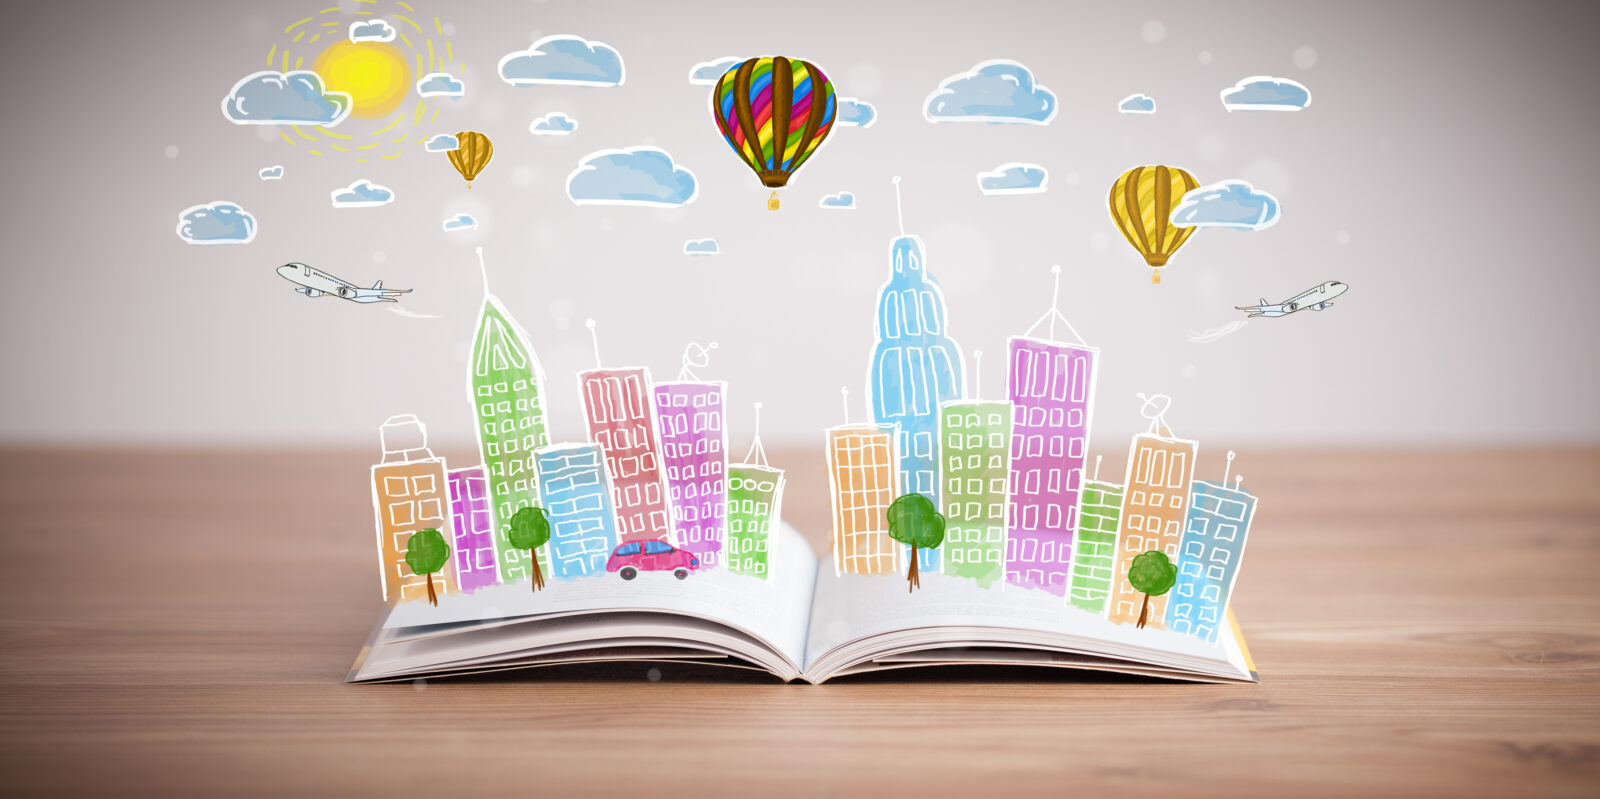 Open book with imaginative items coming out of the pages, such as colorful buildings, hot air balloons, airplanes, and clouds.